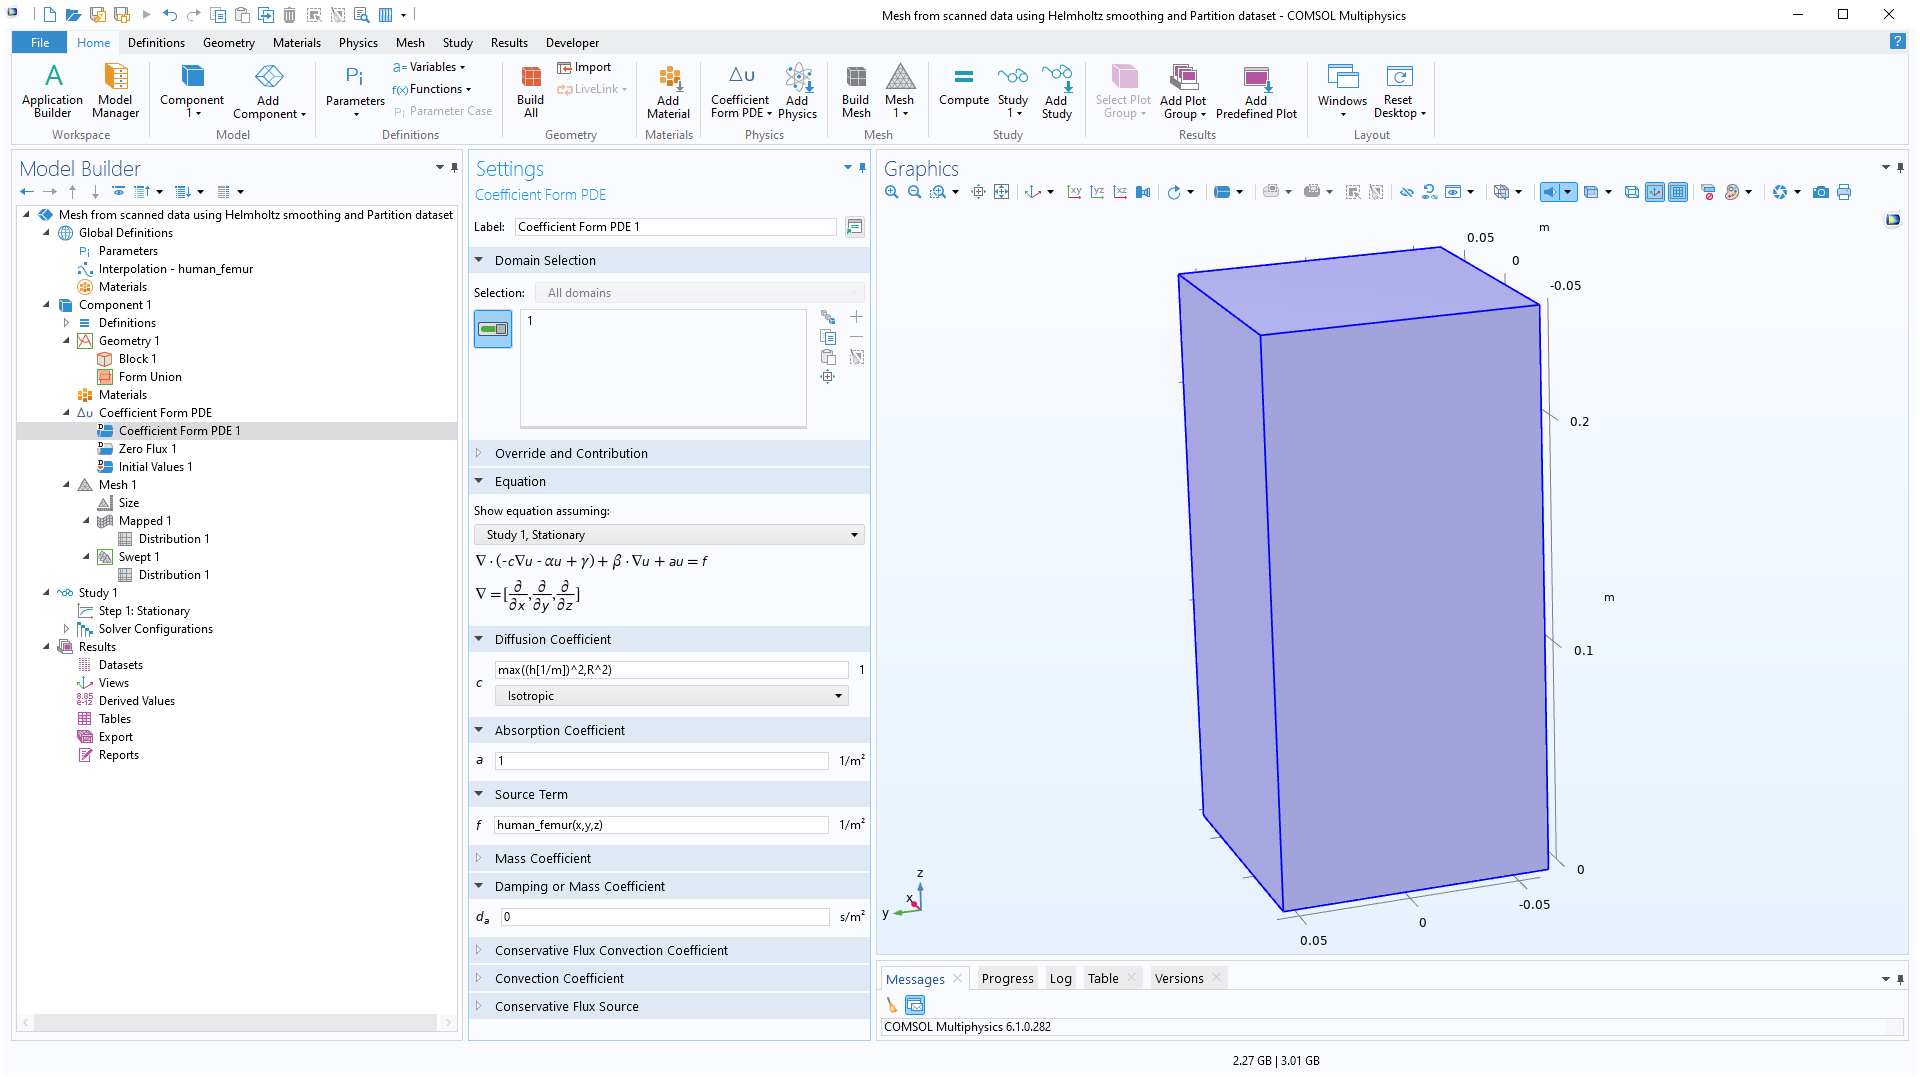 The COMSOL Multiphysics software UI with the Coefficient Form PDE interface highlighted and a rectangular model in the Graphics window.